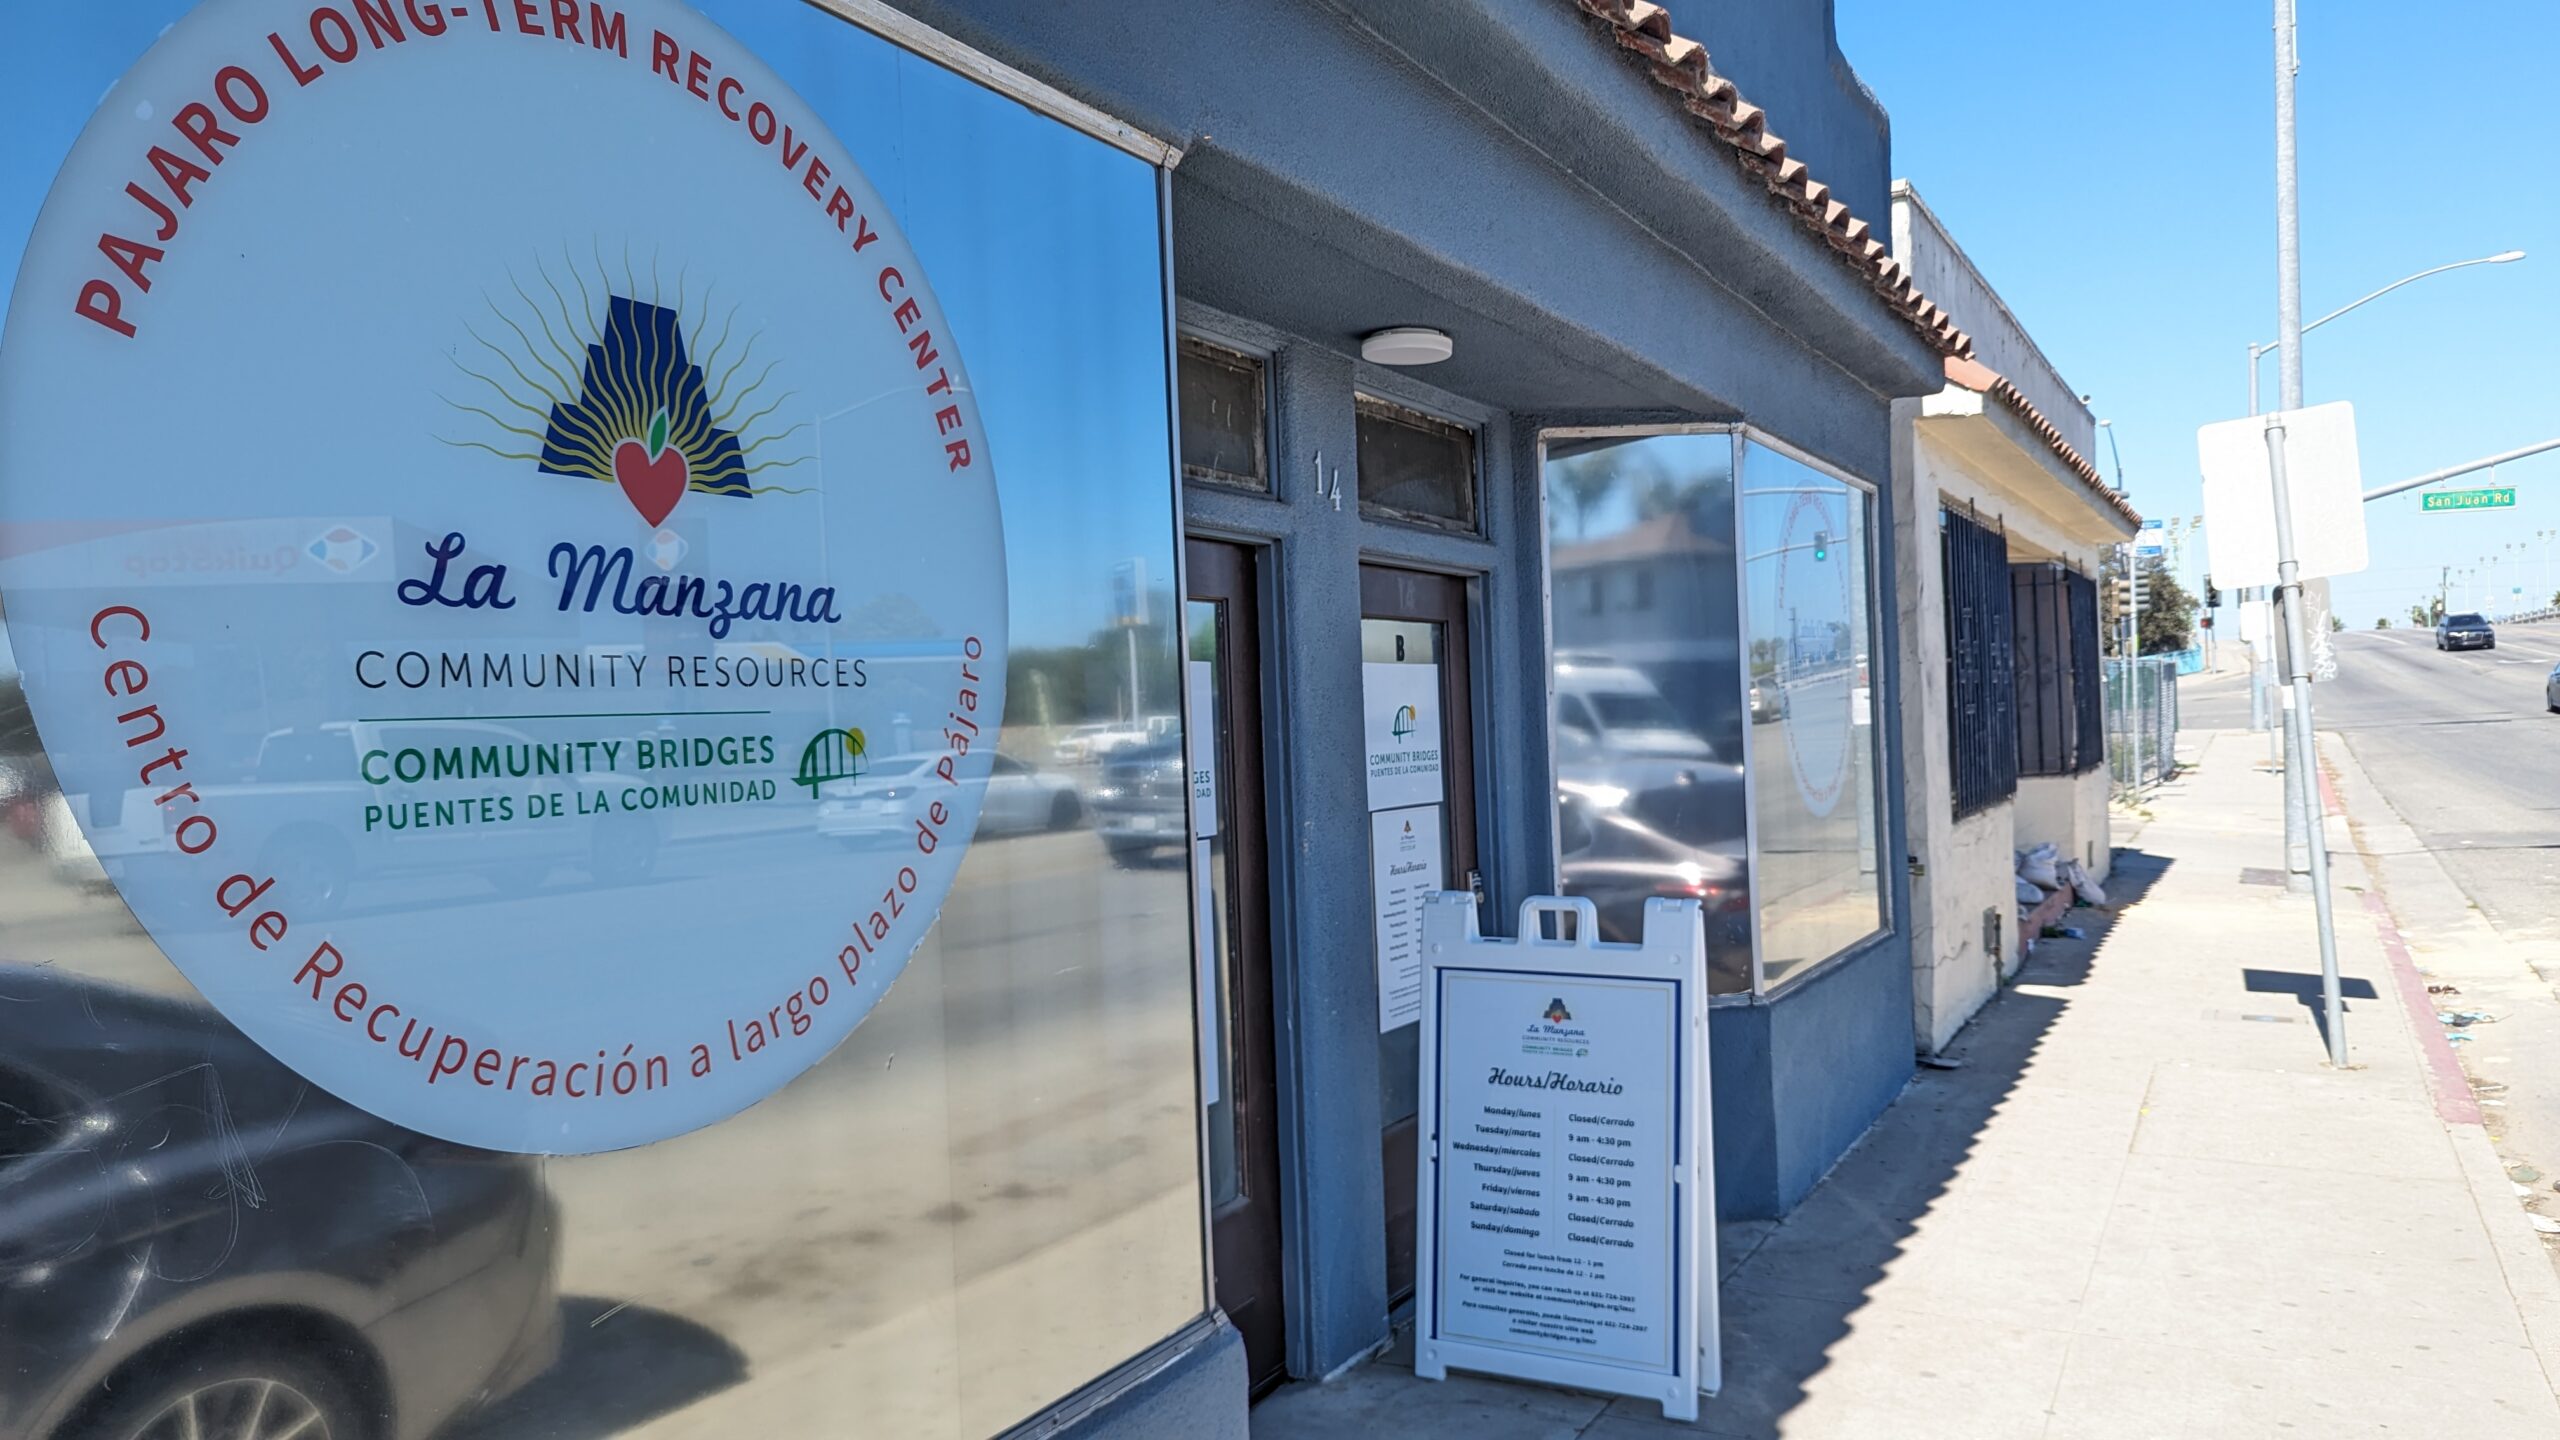 The window of the Pajaro Long-Term Recovery Center in Pajaro show the center's logo. A sandwich board sits on the sidewalk showing the center's open hours.